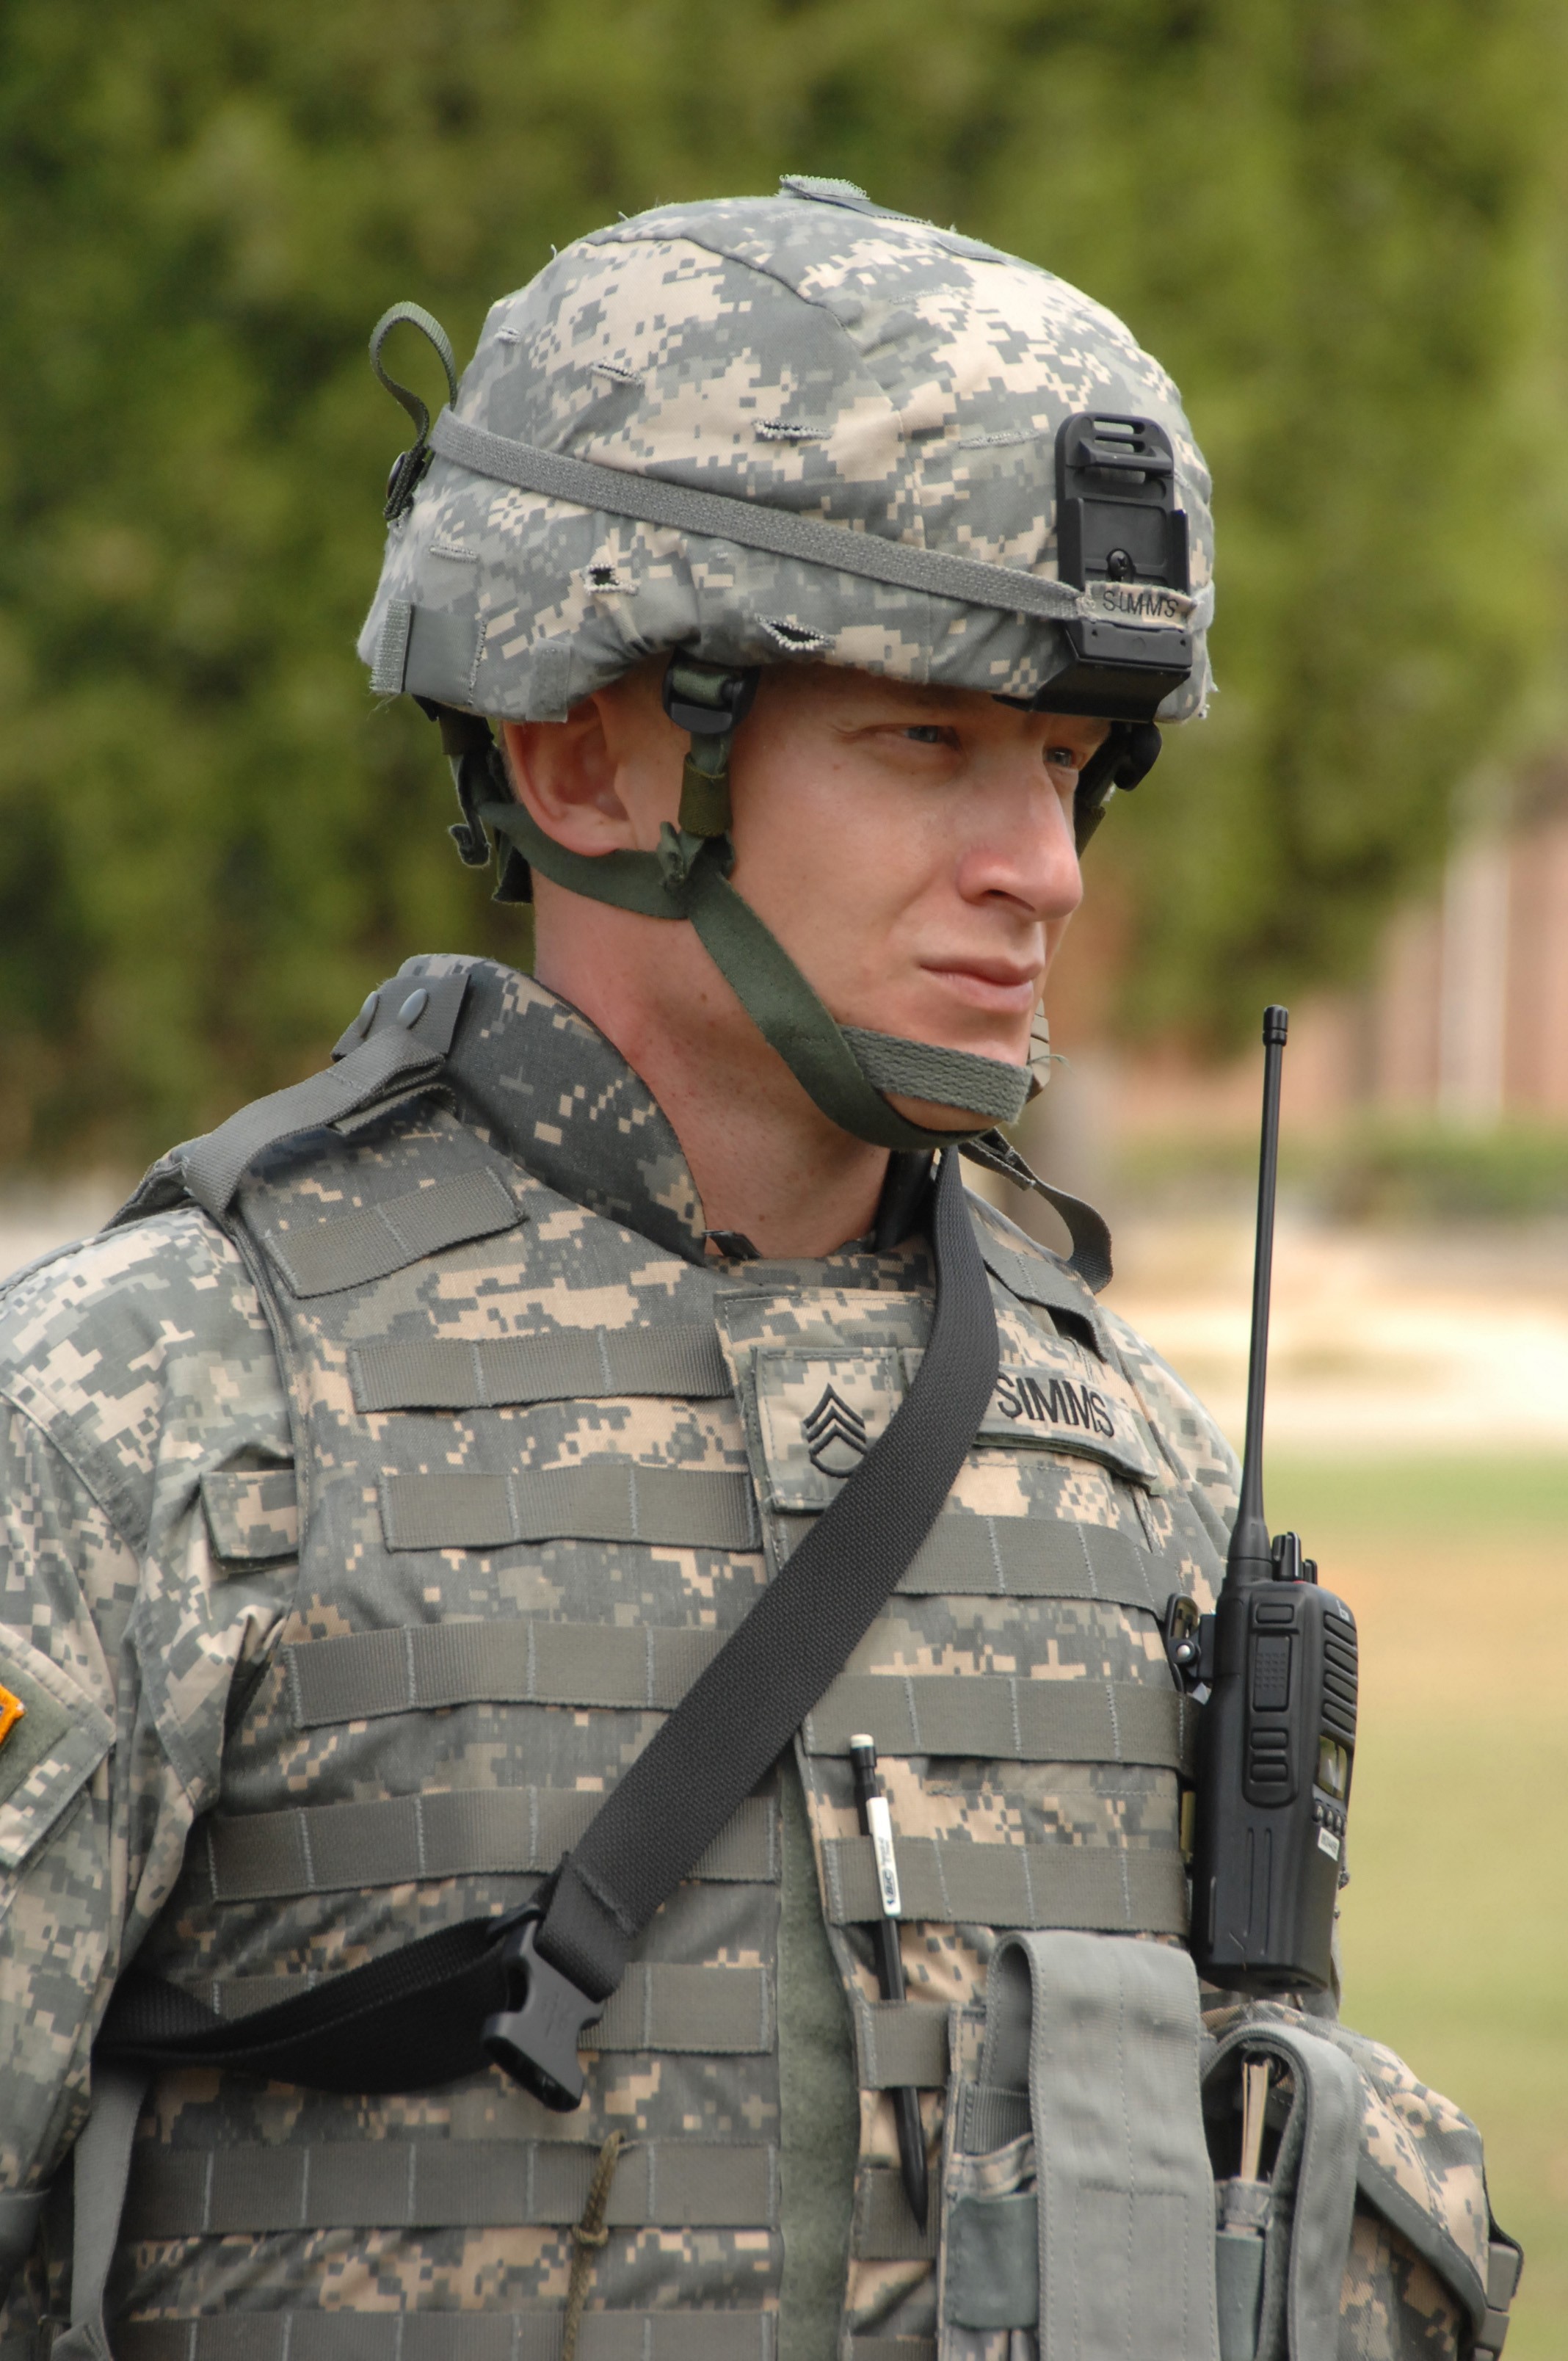 Negotiating the Terrain | Article | The United States Army